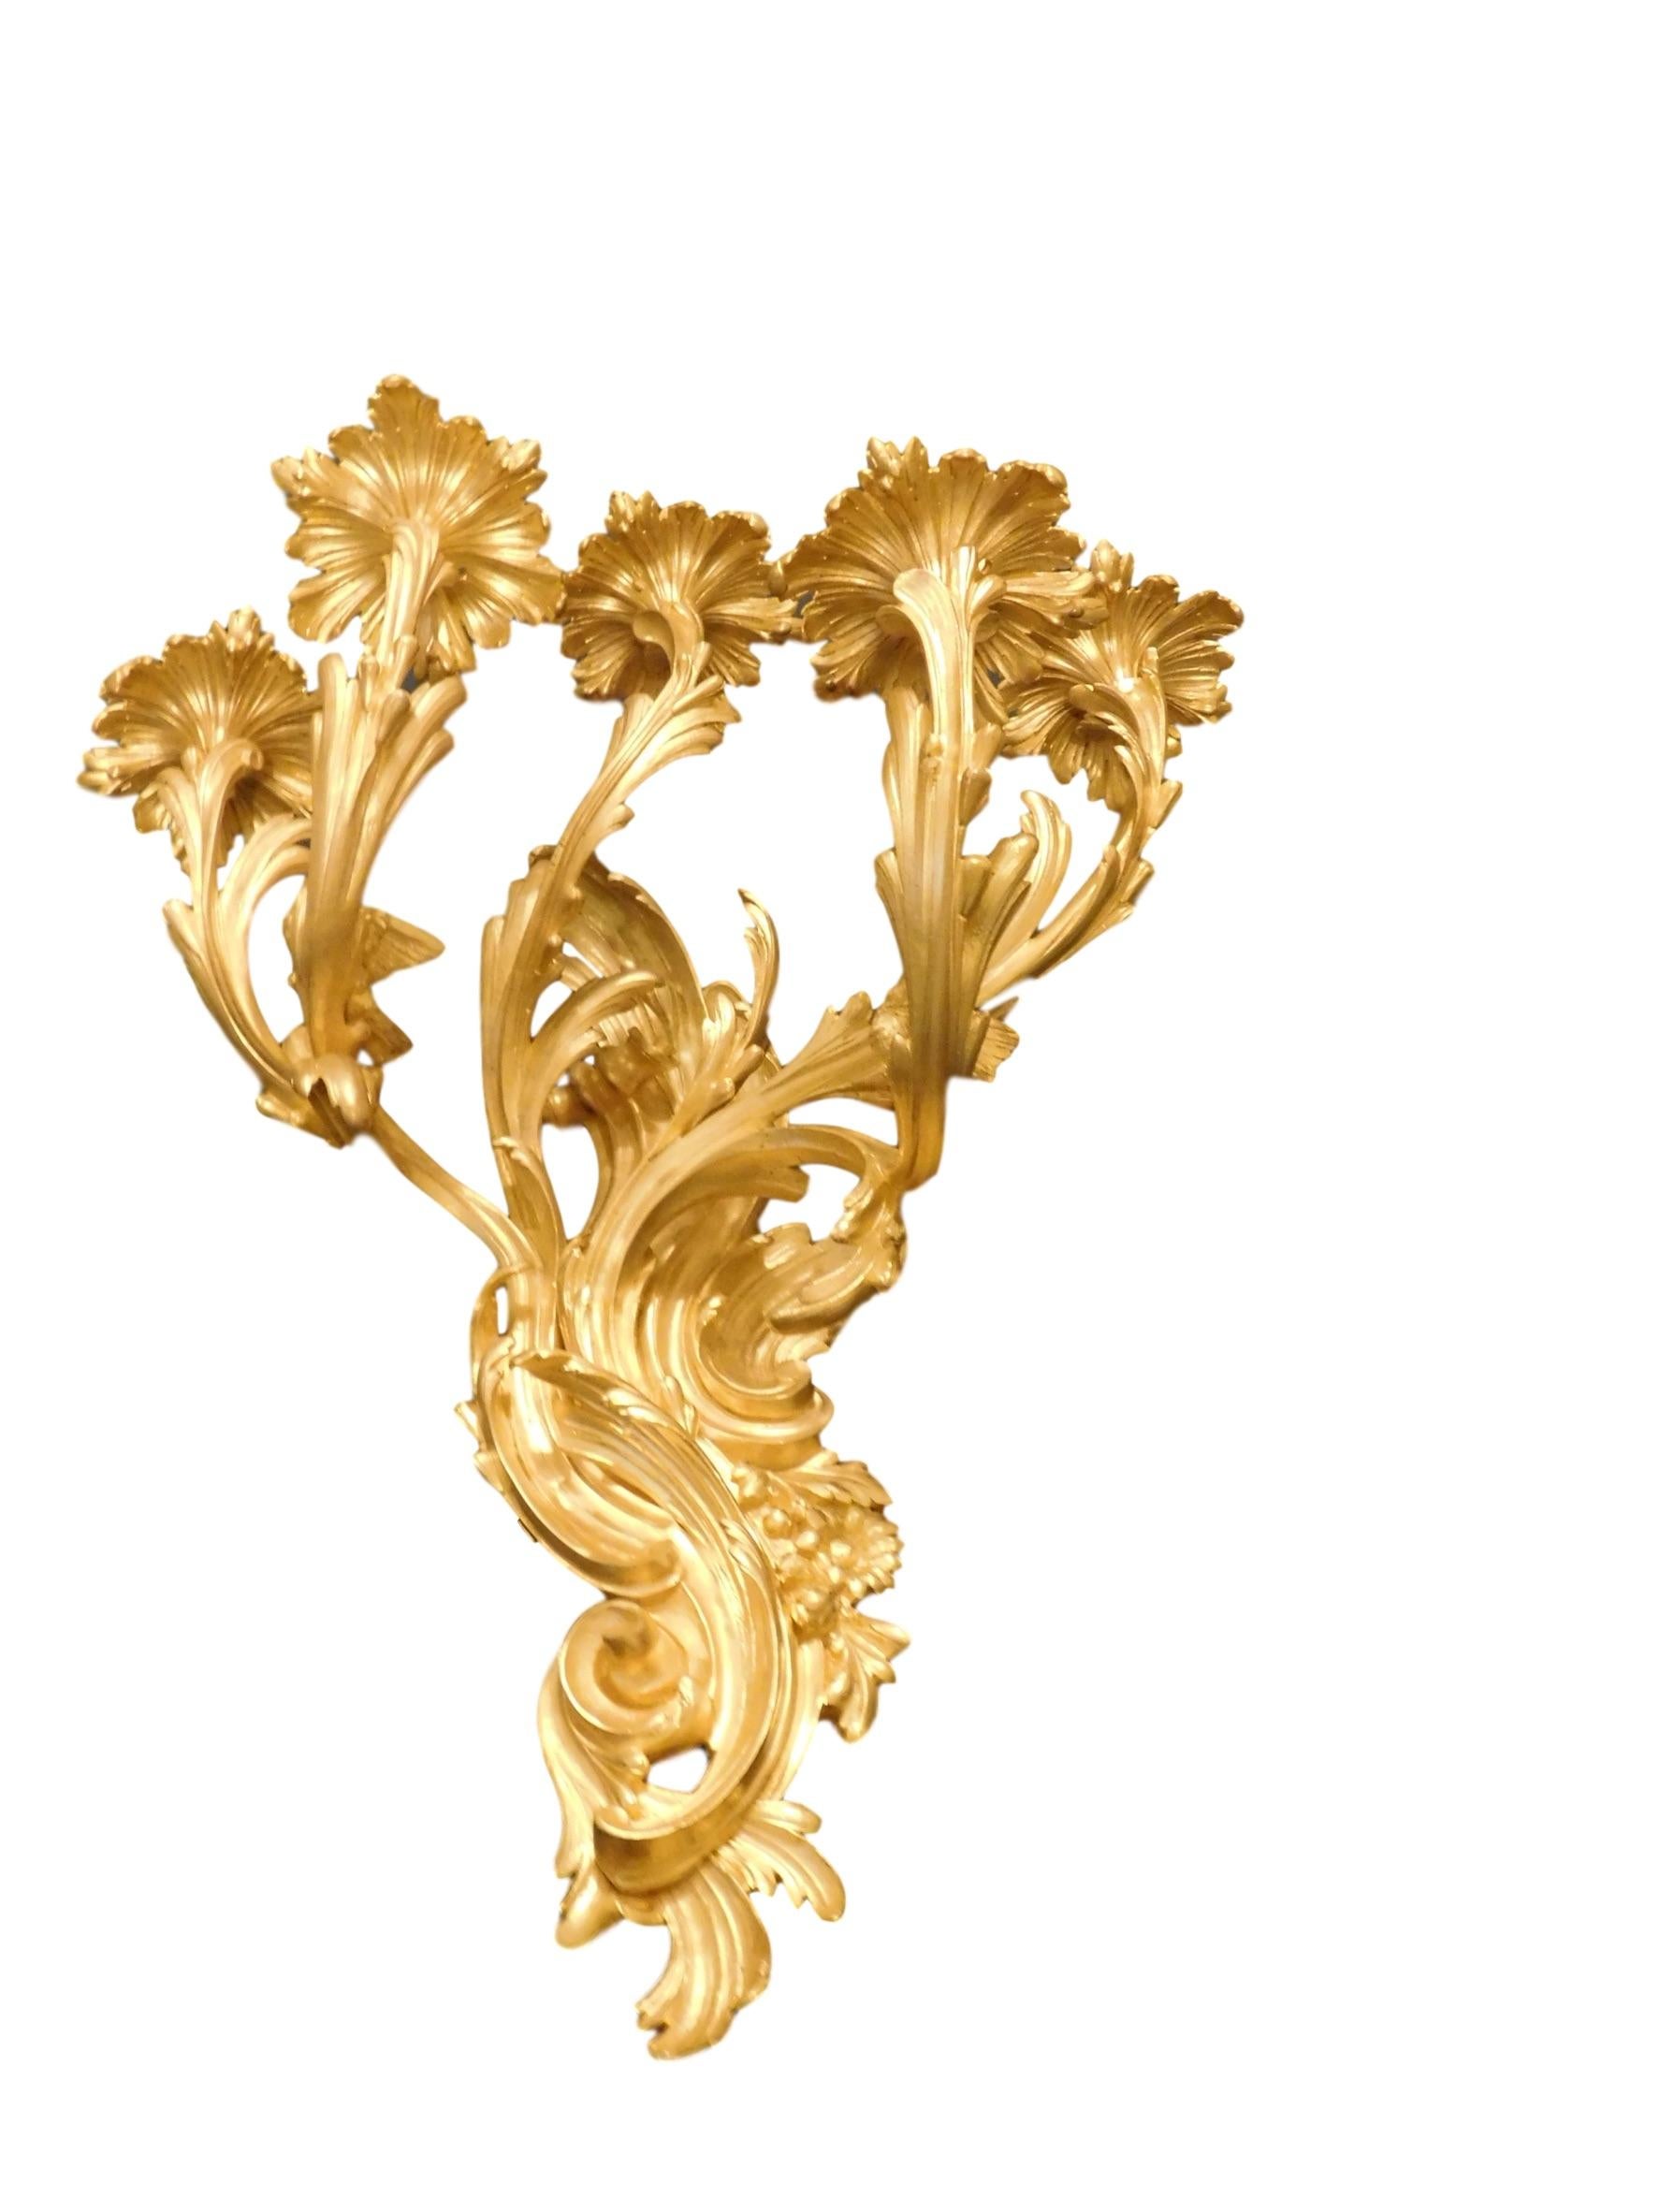 Impressive pair of gilt bronze sconces by Victor Paillard during the second empire, Napoleon III period. Exquisitely cast in the highest quality mercury gilt bronze with a deep, warm and glowing patina. Crisp detailed sculpted Rococo leafy C-scroll